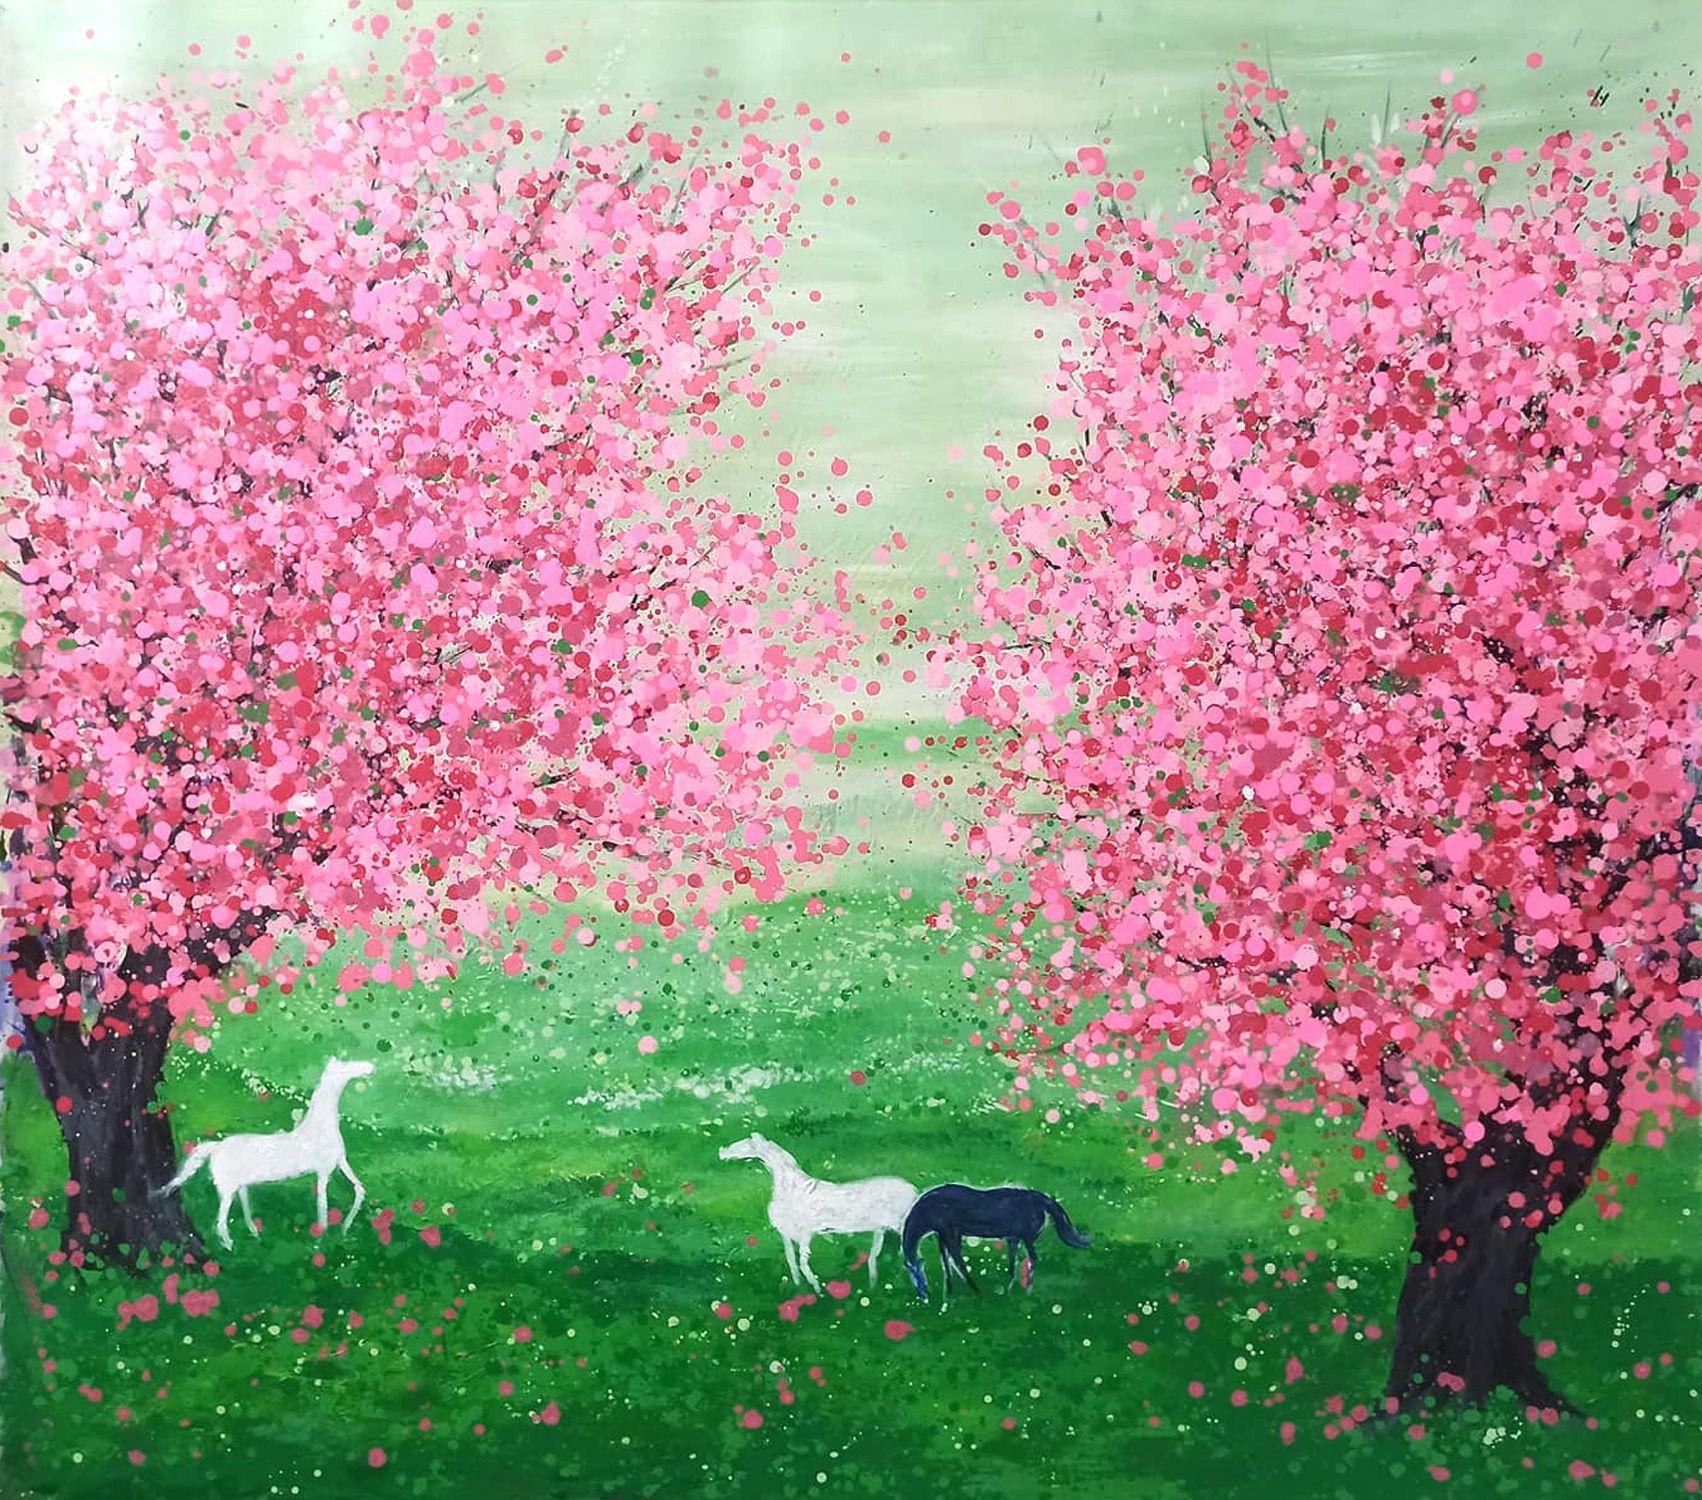 Peach blossom blooms in spring, peaceful scenery  . My paintings are painted using the drip technique like the artist Jackson Paullock. The painting is dripped with many layers of color and is very elaborately colored and takes a long time to